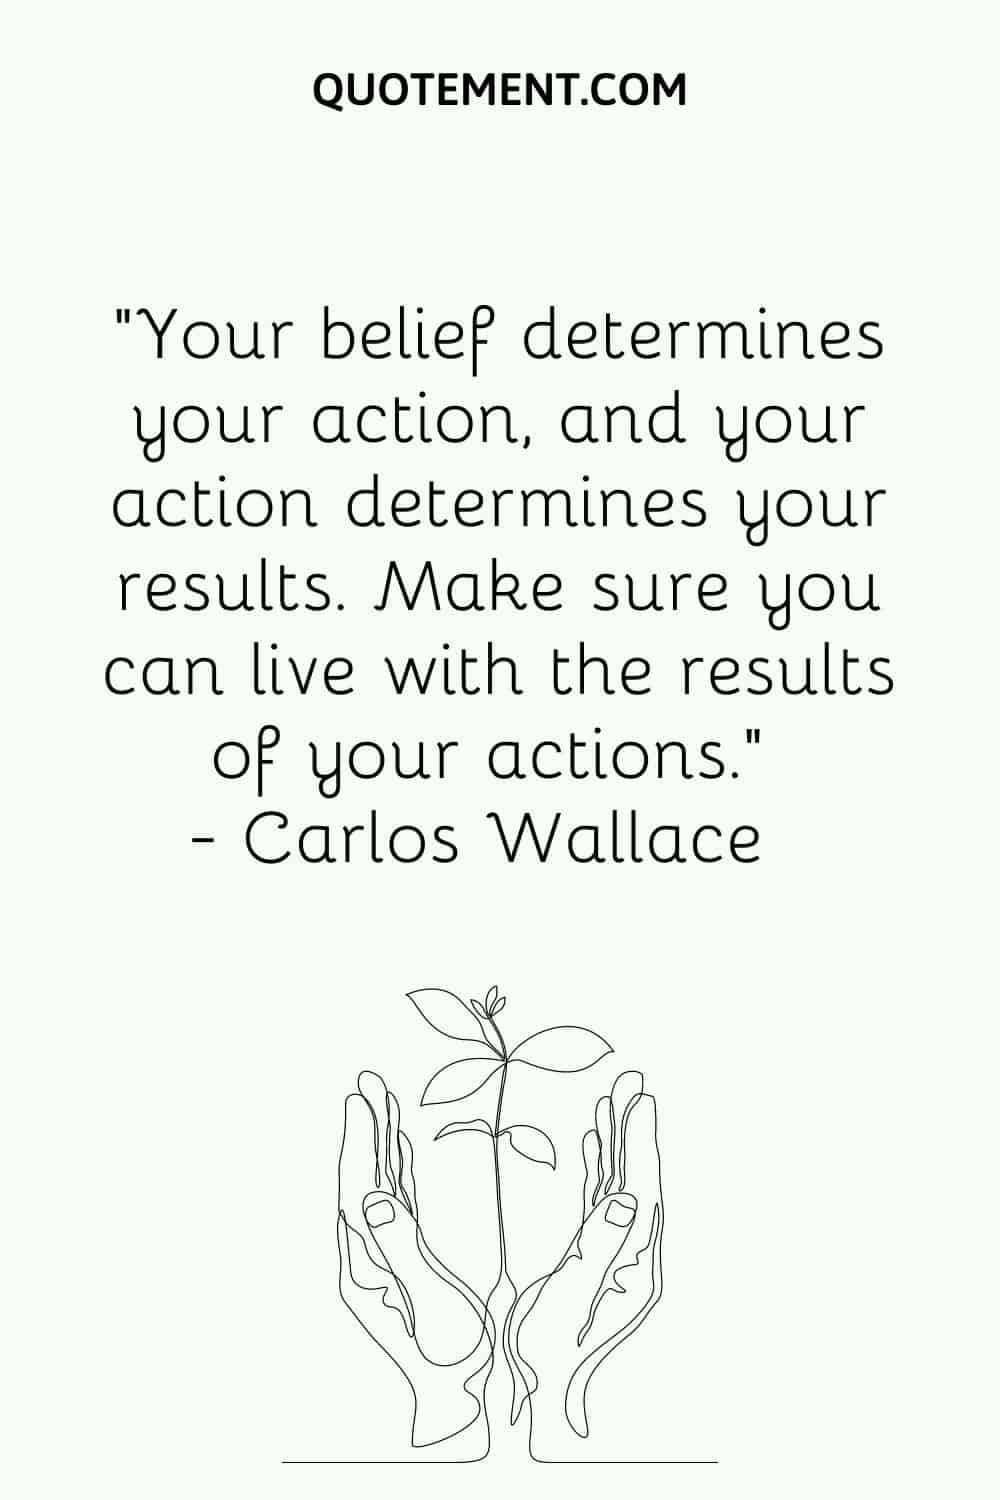 Your belief determines your action, and your action determines your results